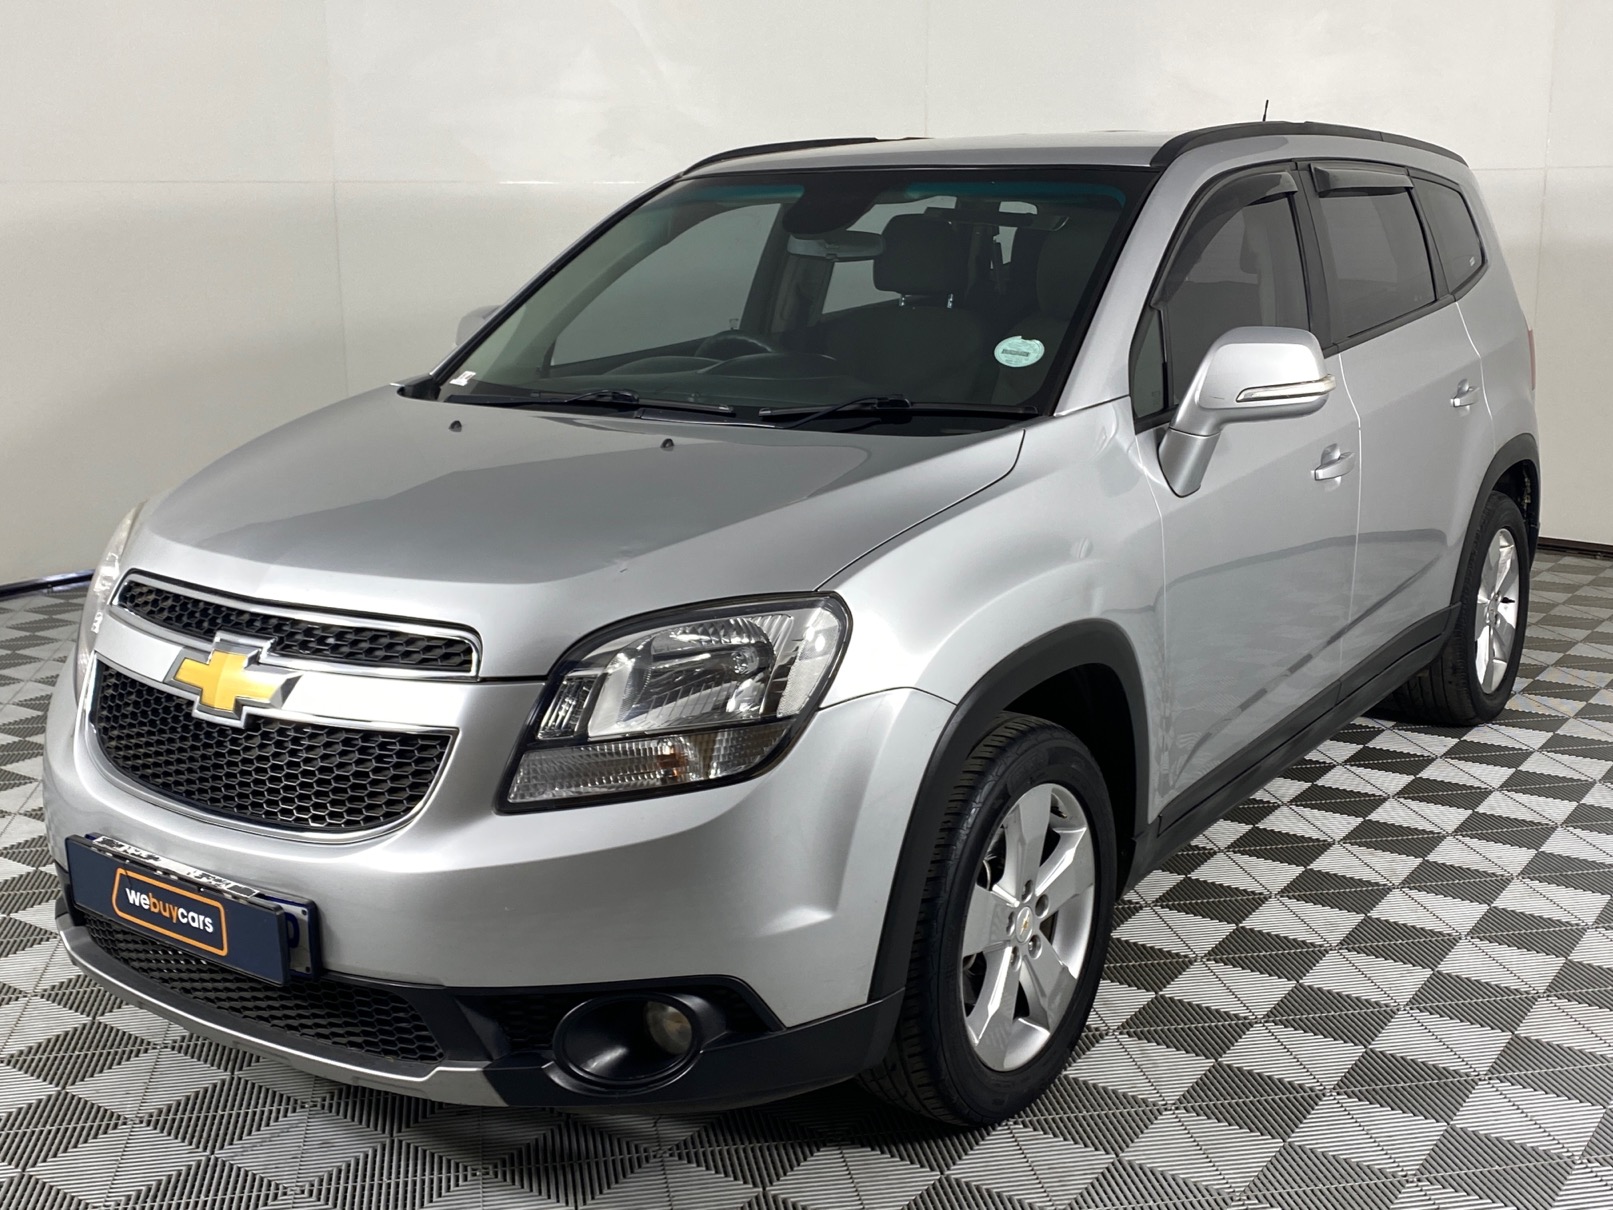 Used 2014 Chevrolet Orlando 1.8ls for sale | WeBuyCars